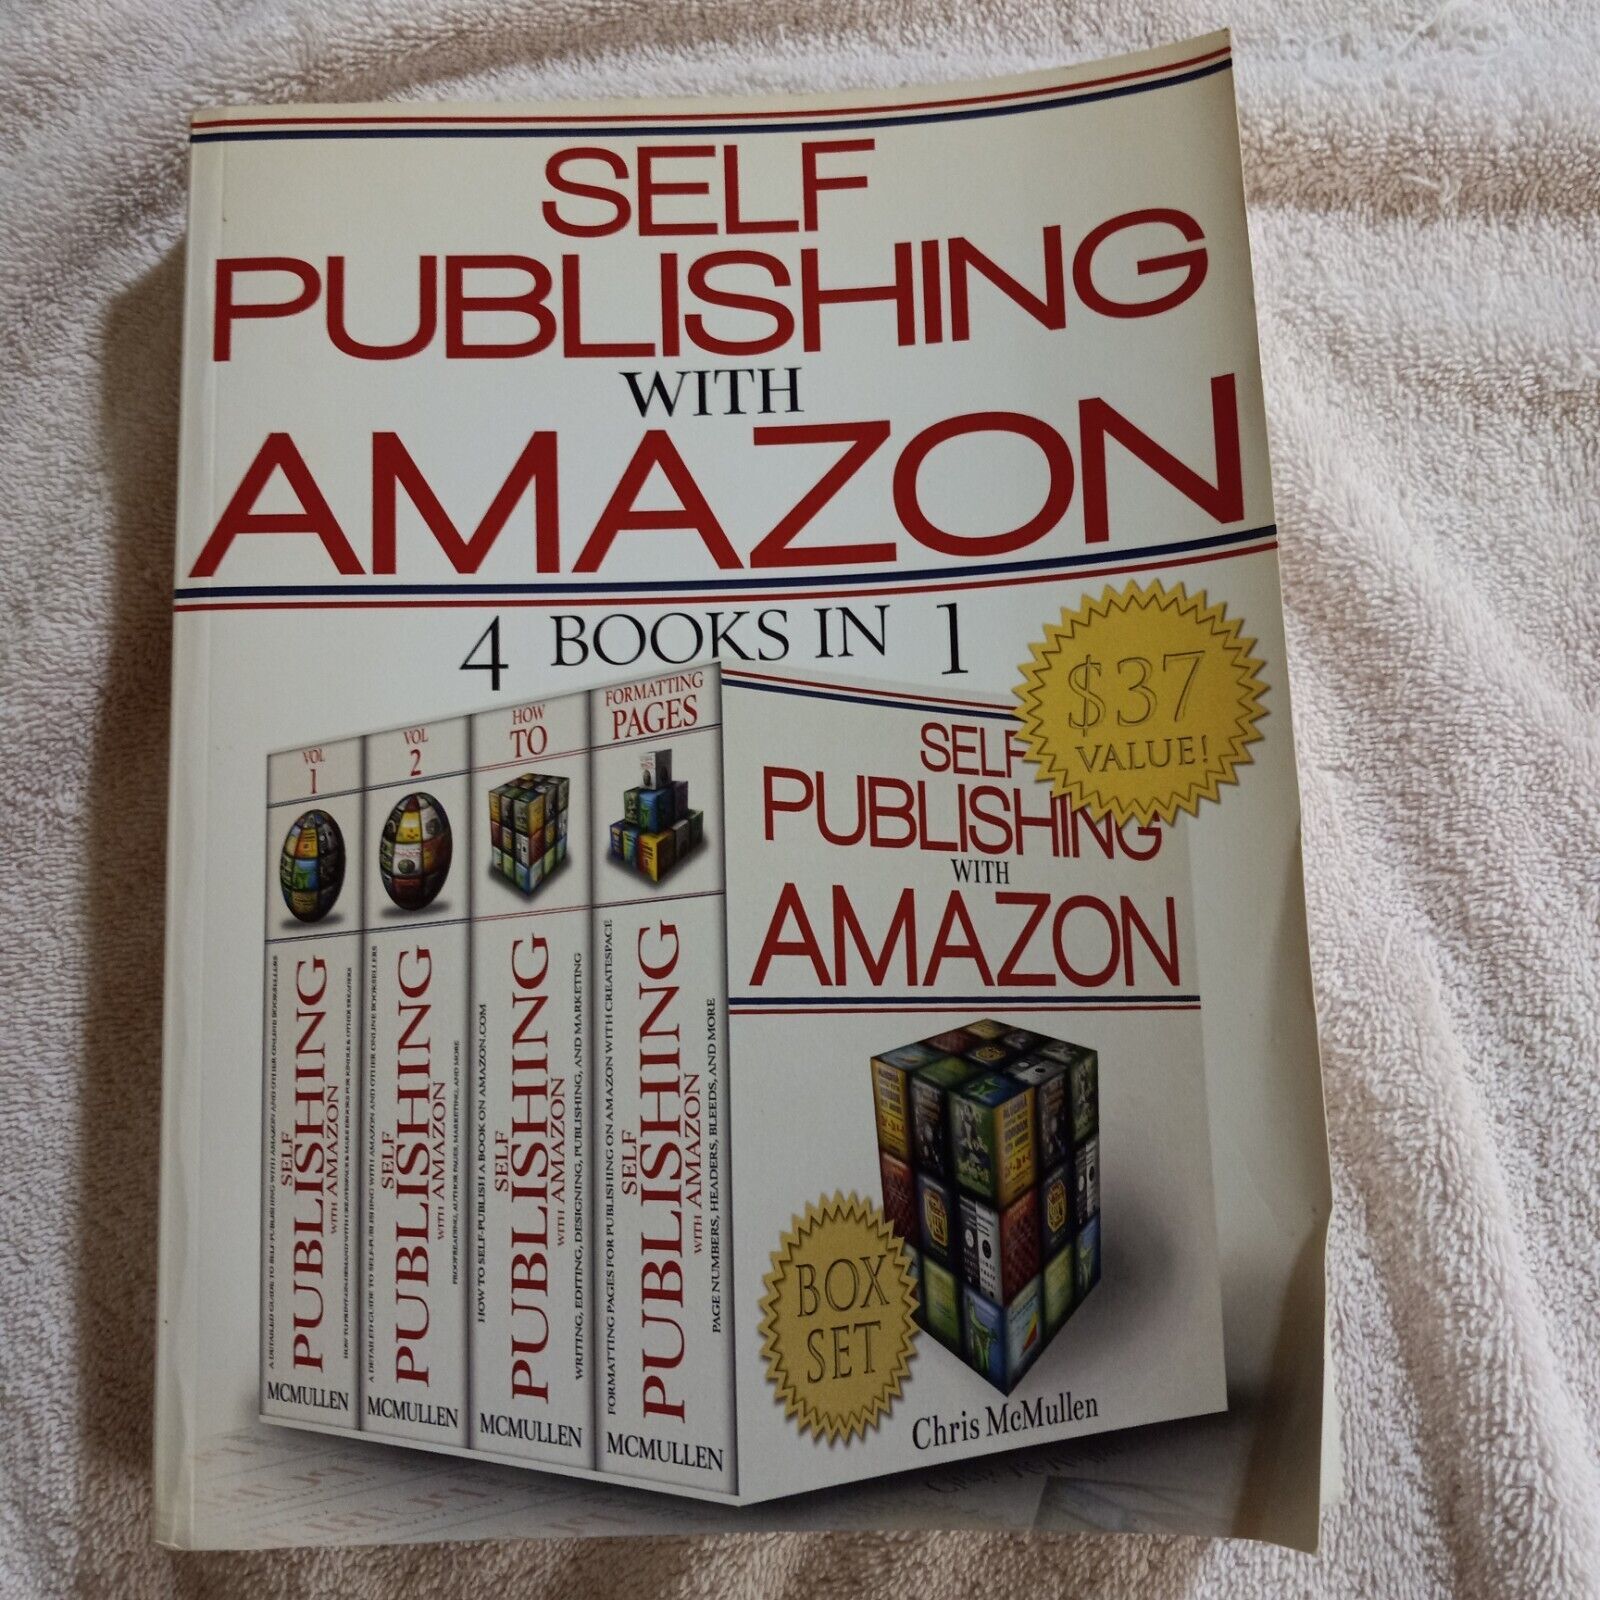 Primary image for Self Publishing with Amazon (4 Books In 1) by Chris McMullen (2014, Paperback)